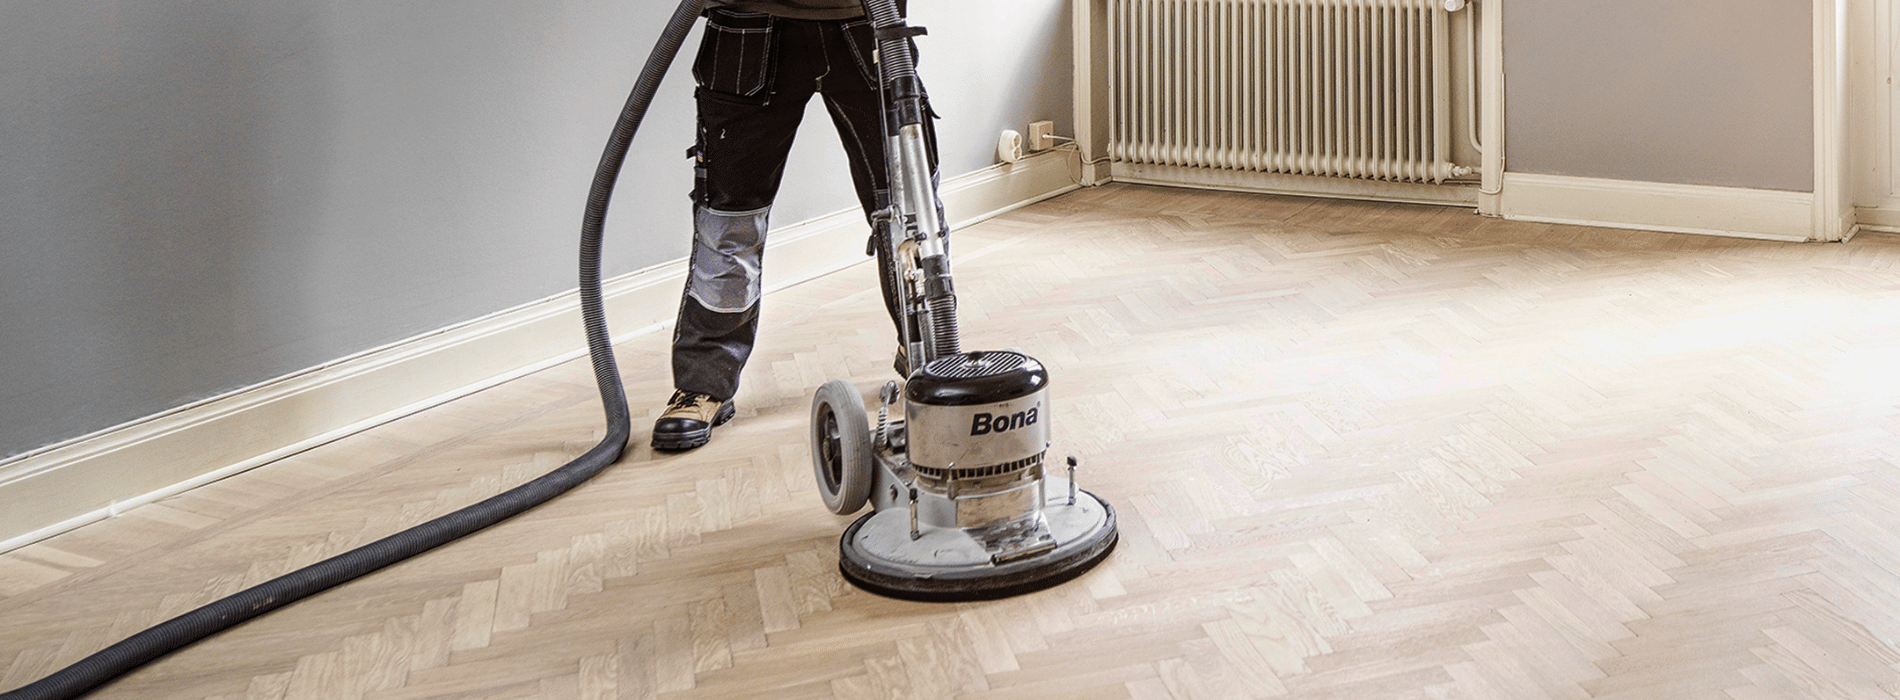 In Rainham, RM13, Mr Sander® are using a Bona FlexiSand 1.9 buffer sander with Ø 407 mm dimension, 1.9 kW effect, 230 V voltage, and 50 Hz/60 Hz frequency. They connect it to a dust extraction system with a HEPA filter for clean and efficient results while sanding a parquet floor.